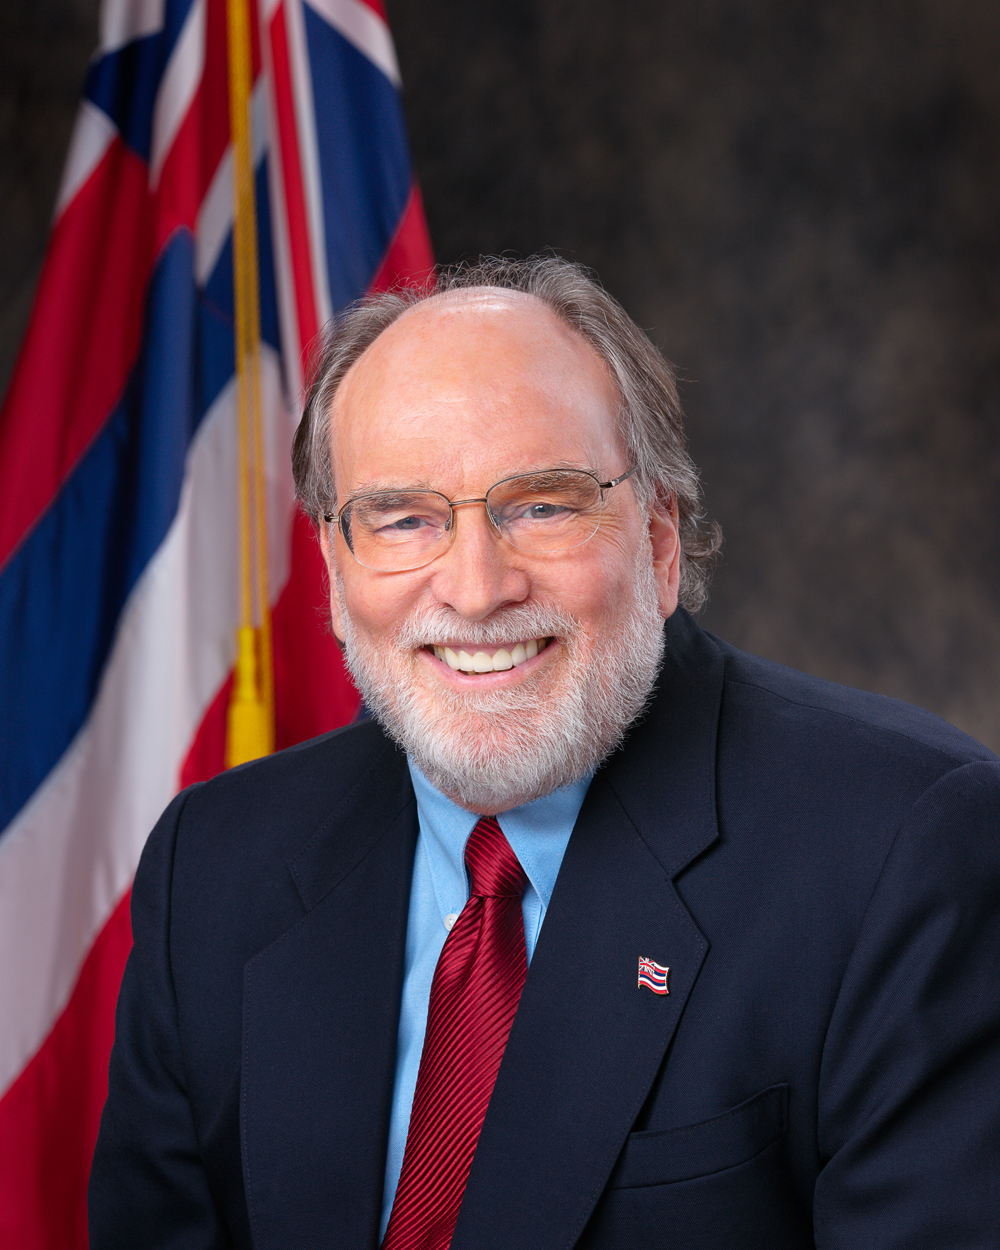 Honorable Neil Abercrombie